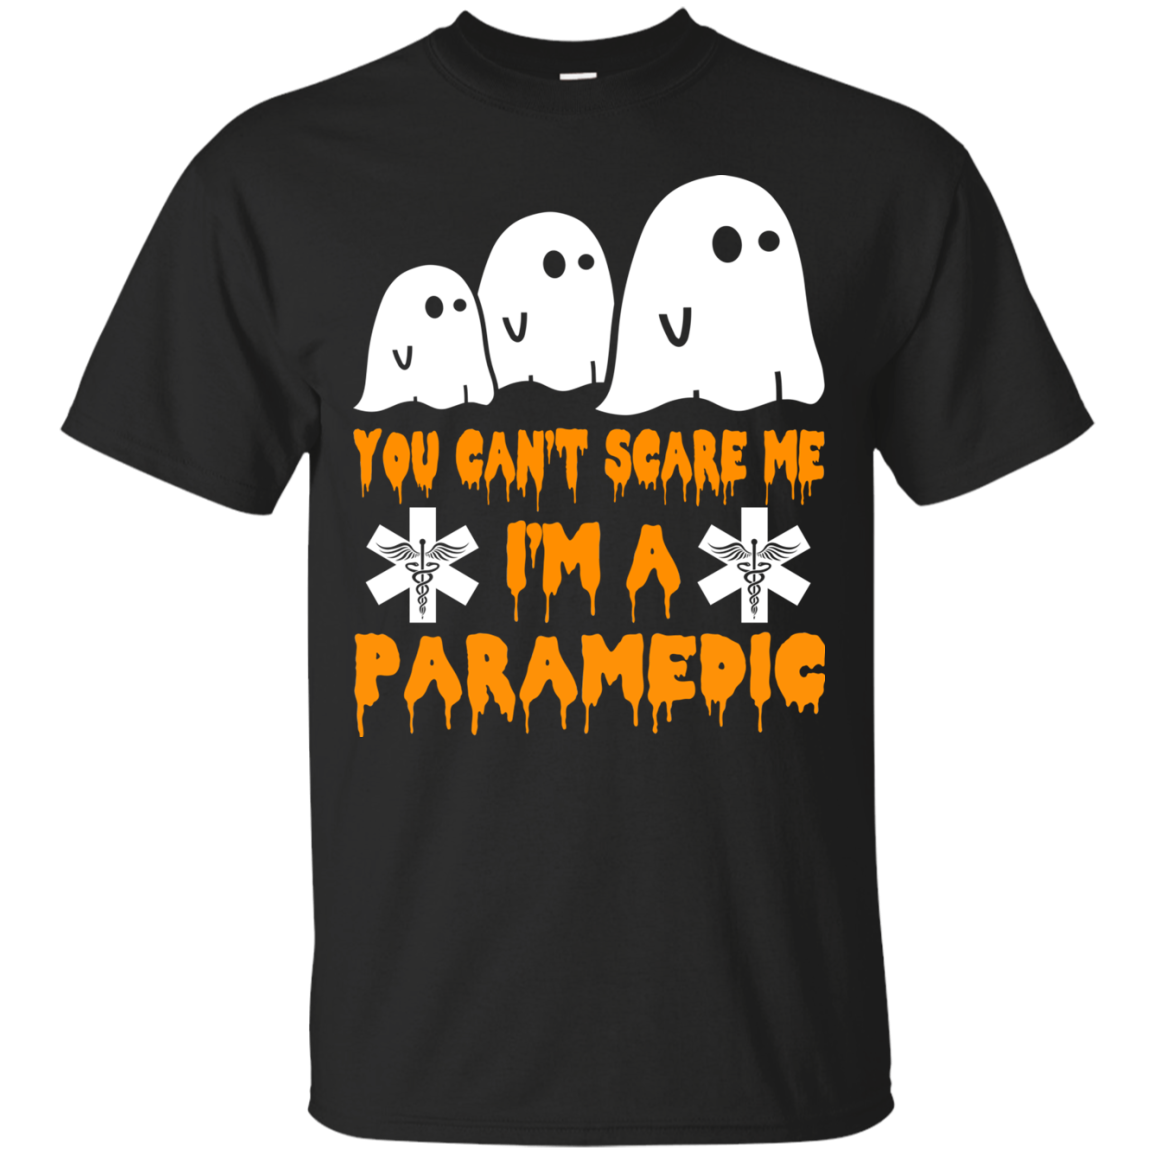 You can’t scare me I'm a Paramedic shirt, hoodie, tank